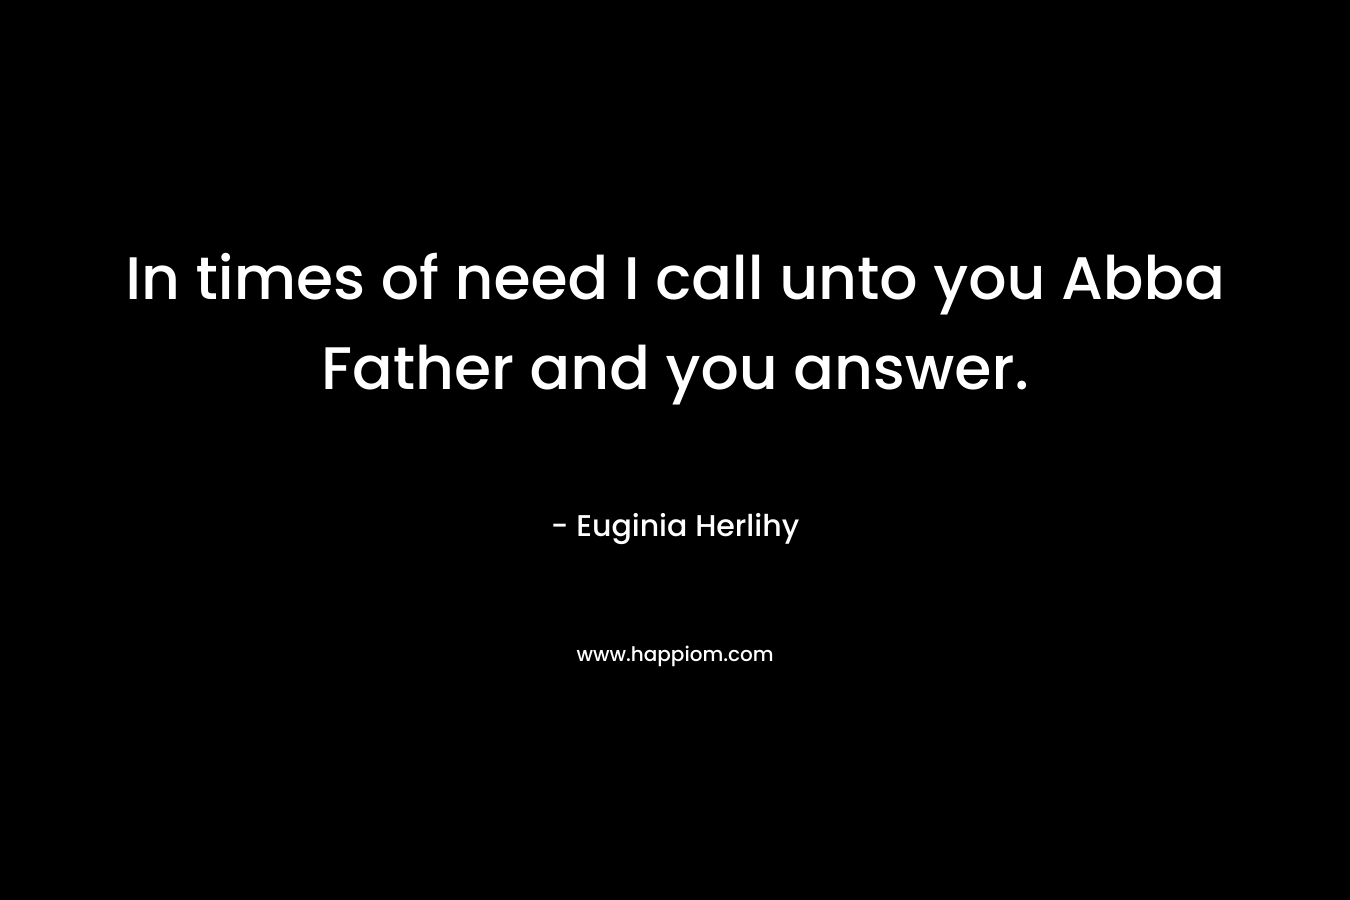 In times of need I call unto you Abba Father and you answer.